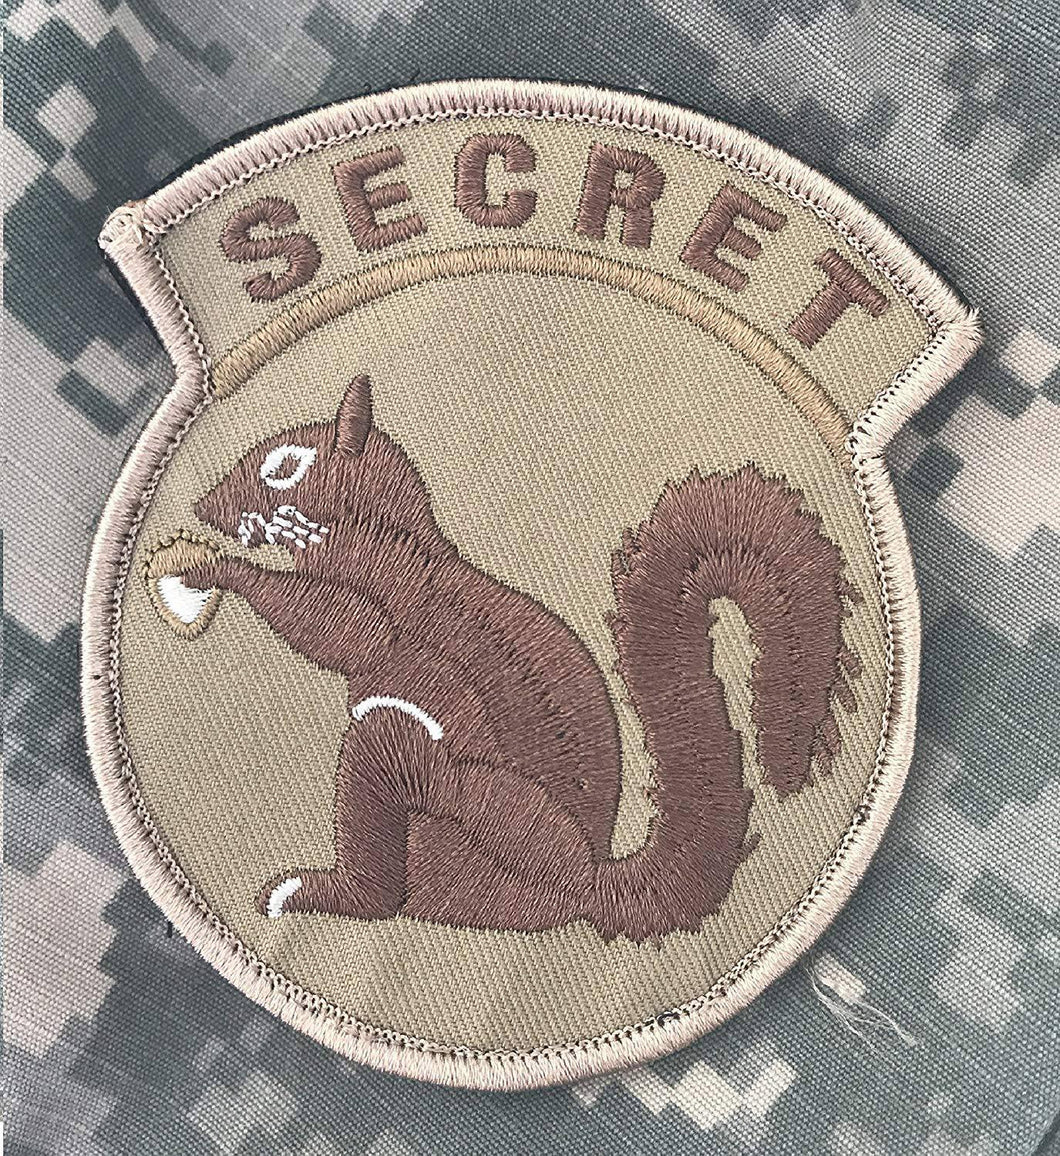 BuckUp Tactical Morale Patch Hook Secret Squirrel Coyote Patches 3